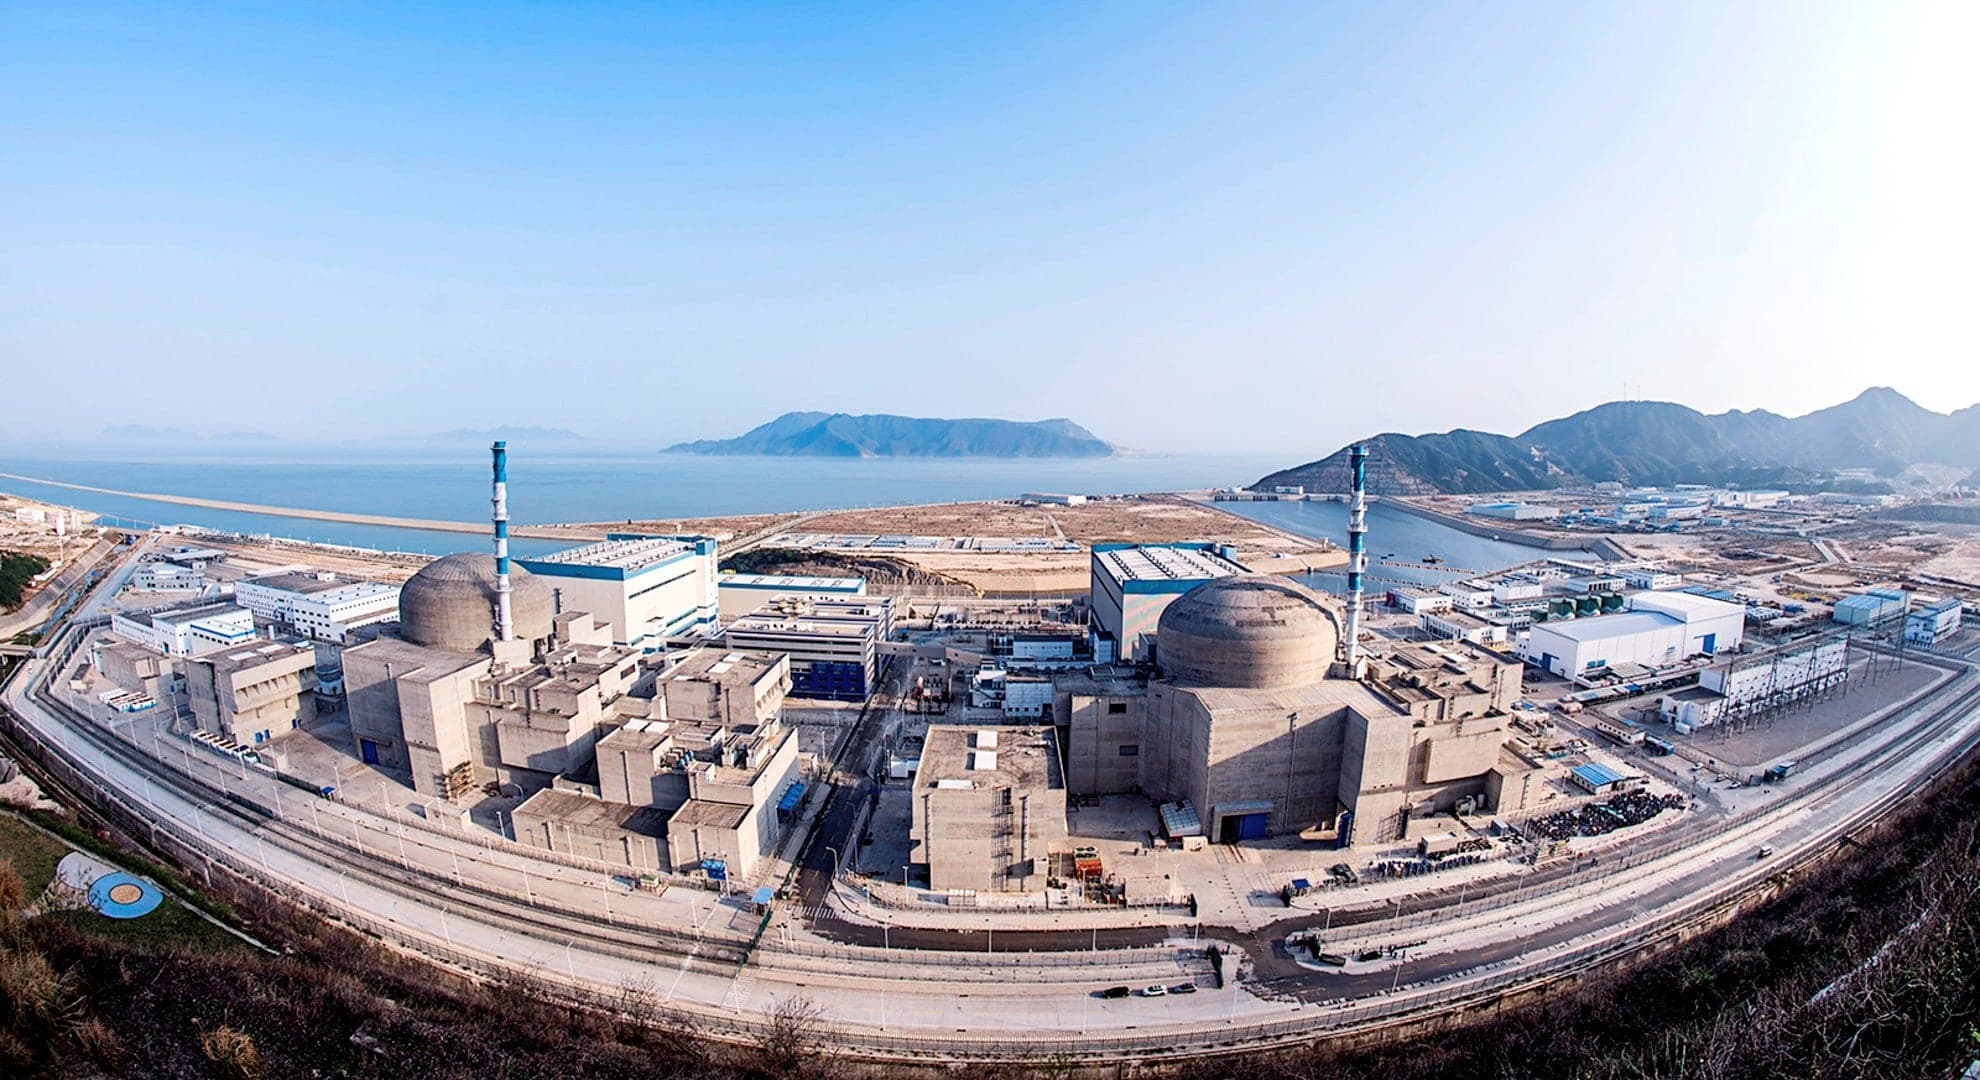 Global Concerns And Questions Grow As China Admits Fuel Rods At Nuclear Plant Are Damaged